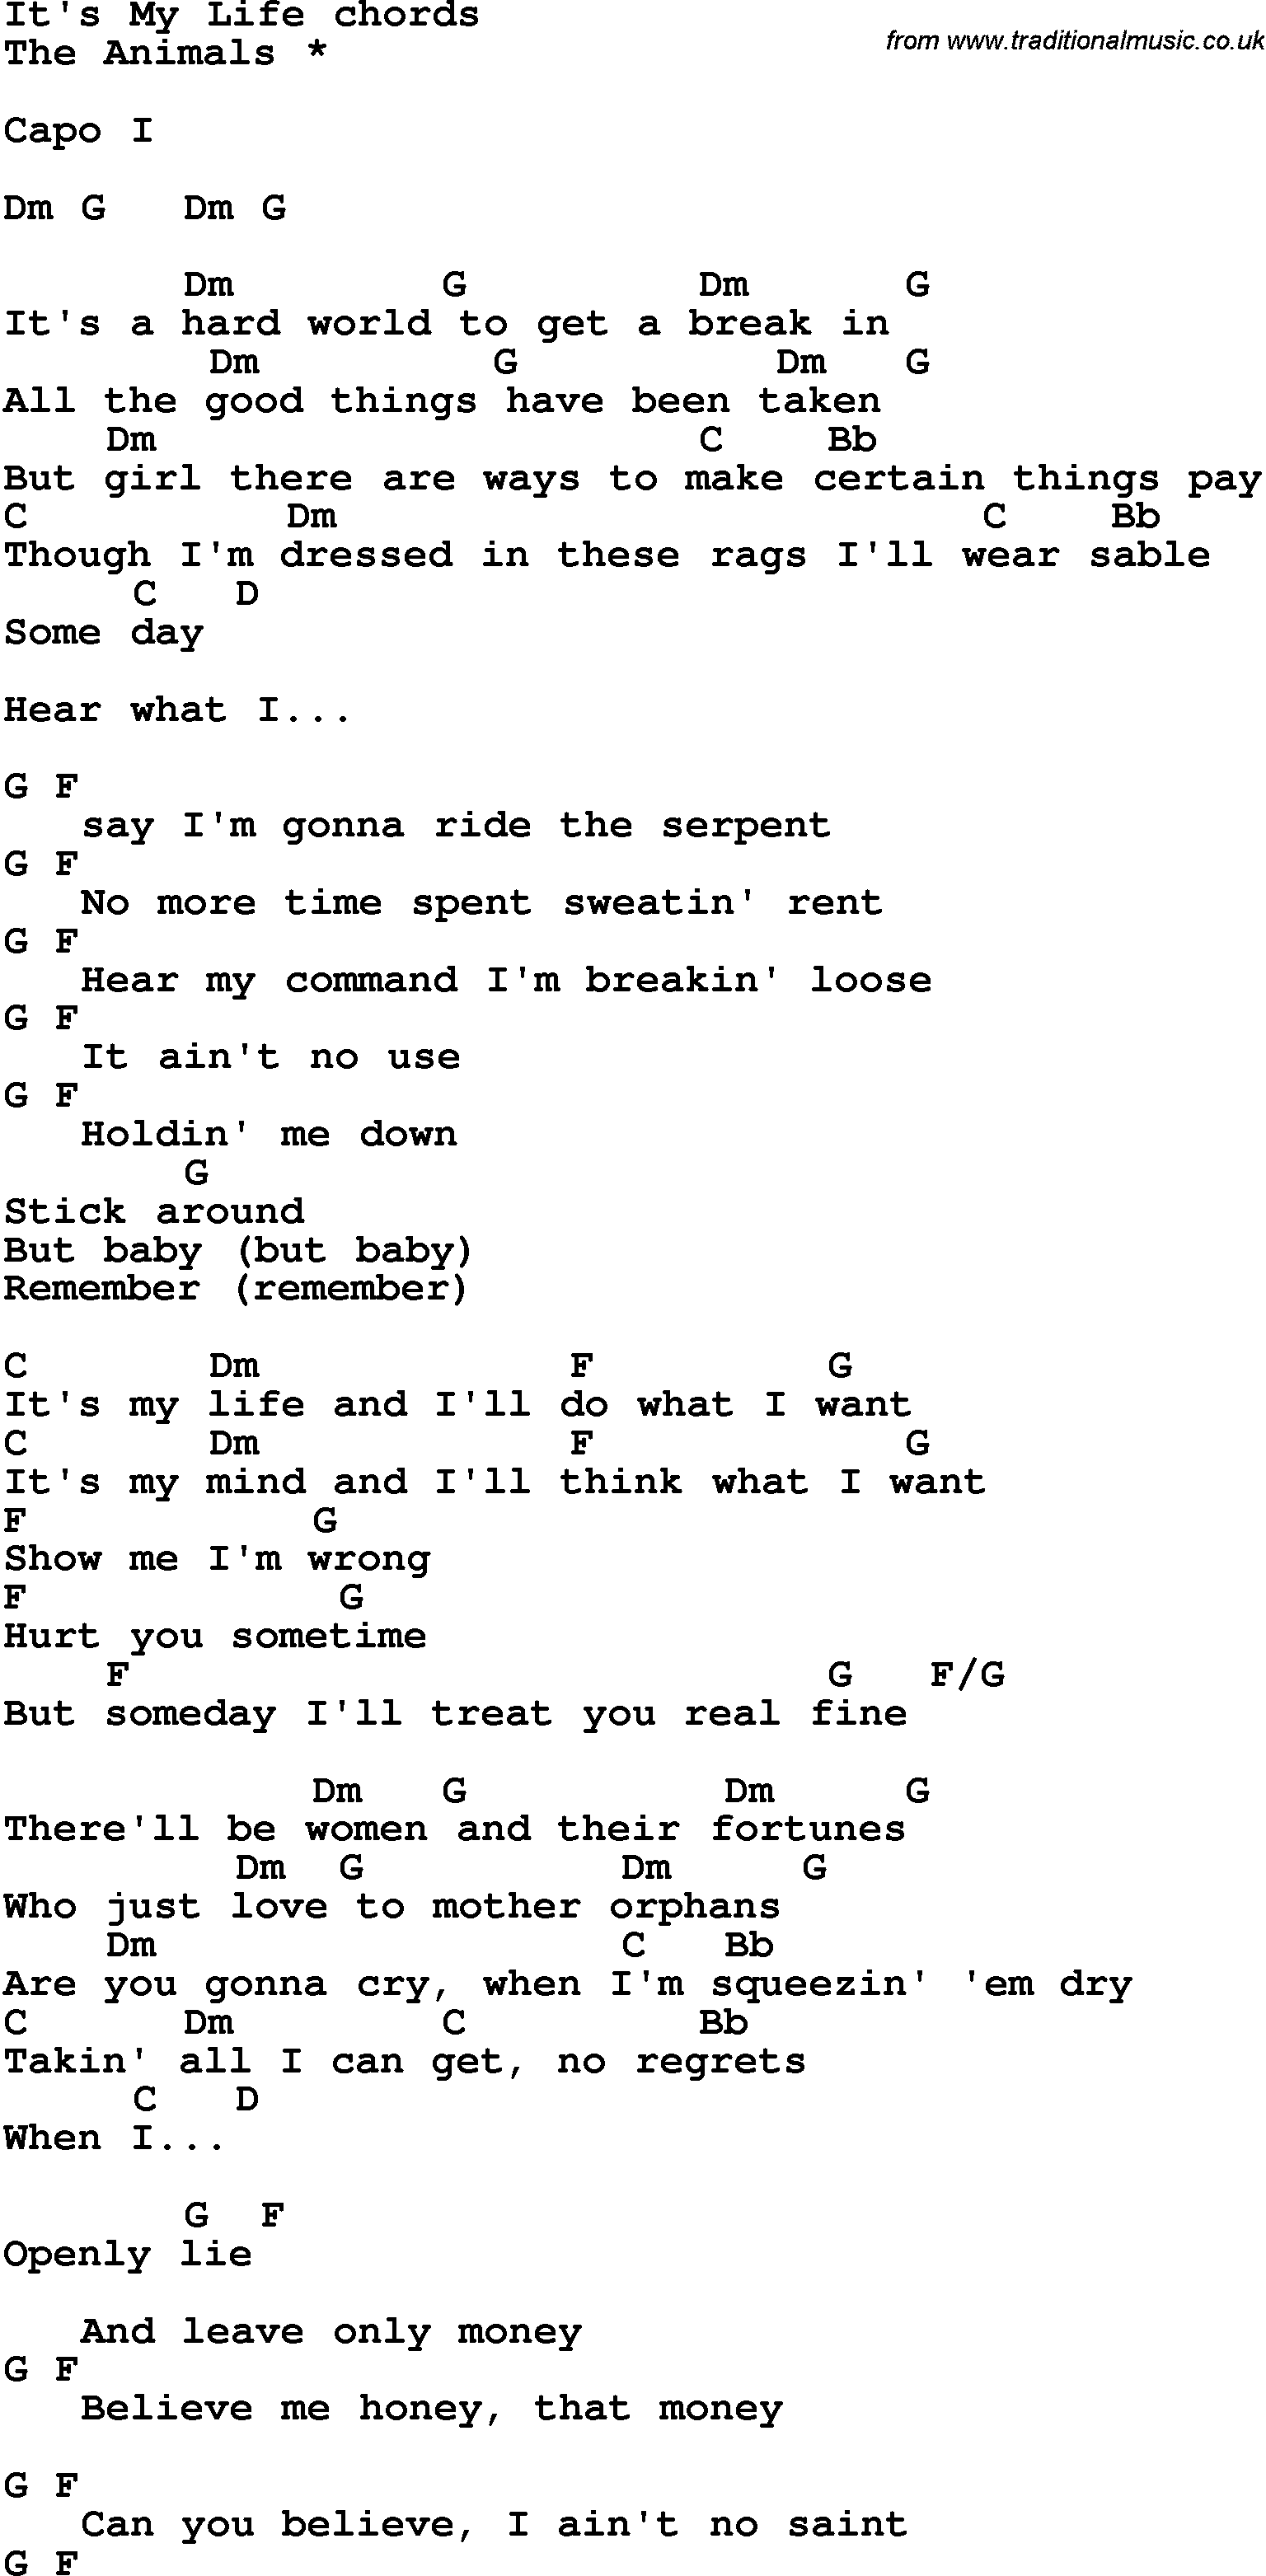 Song lyrics with guitar chords for It's My Life